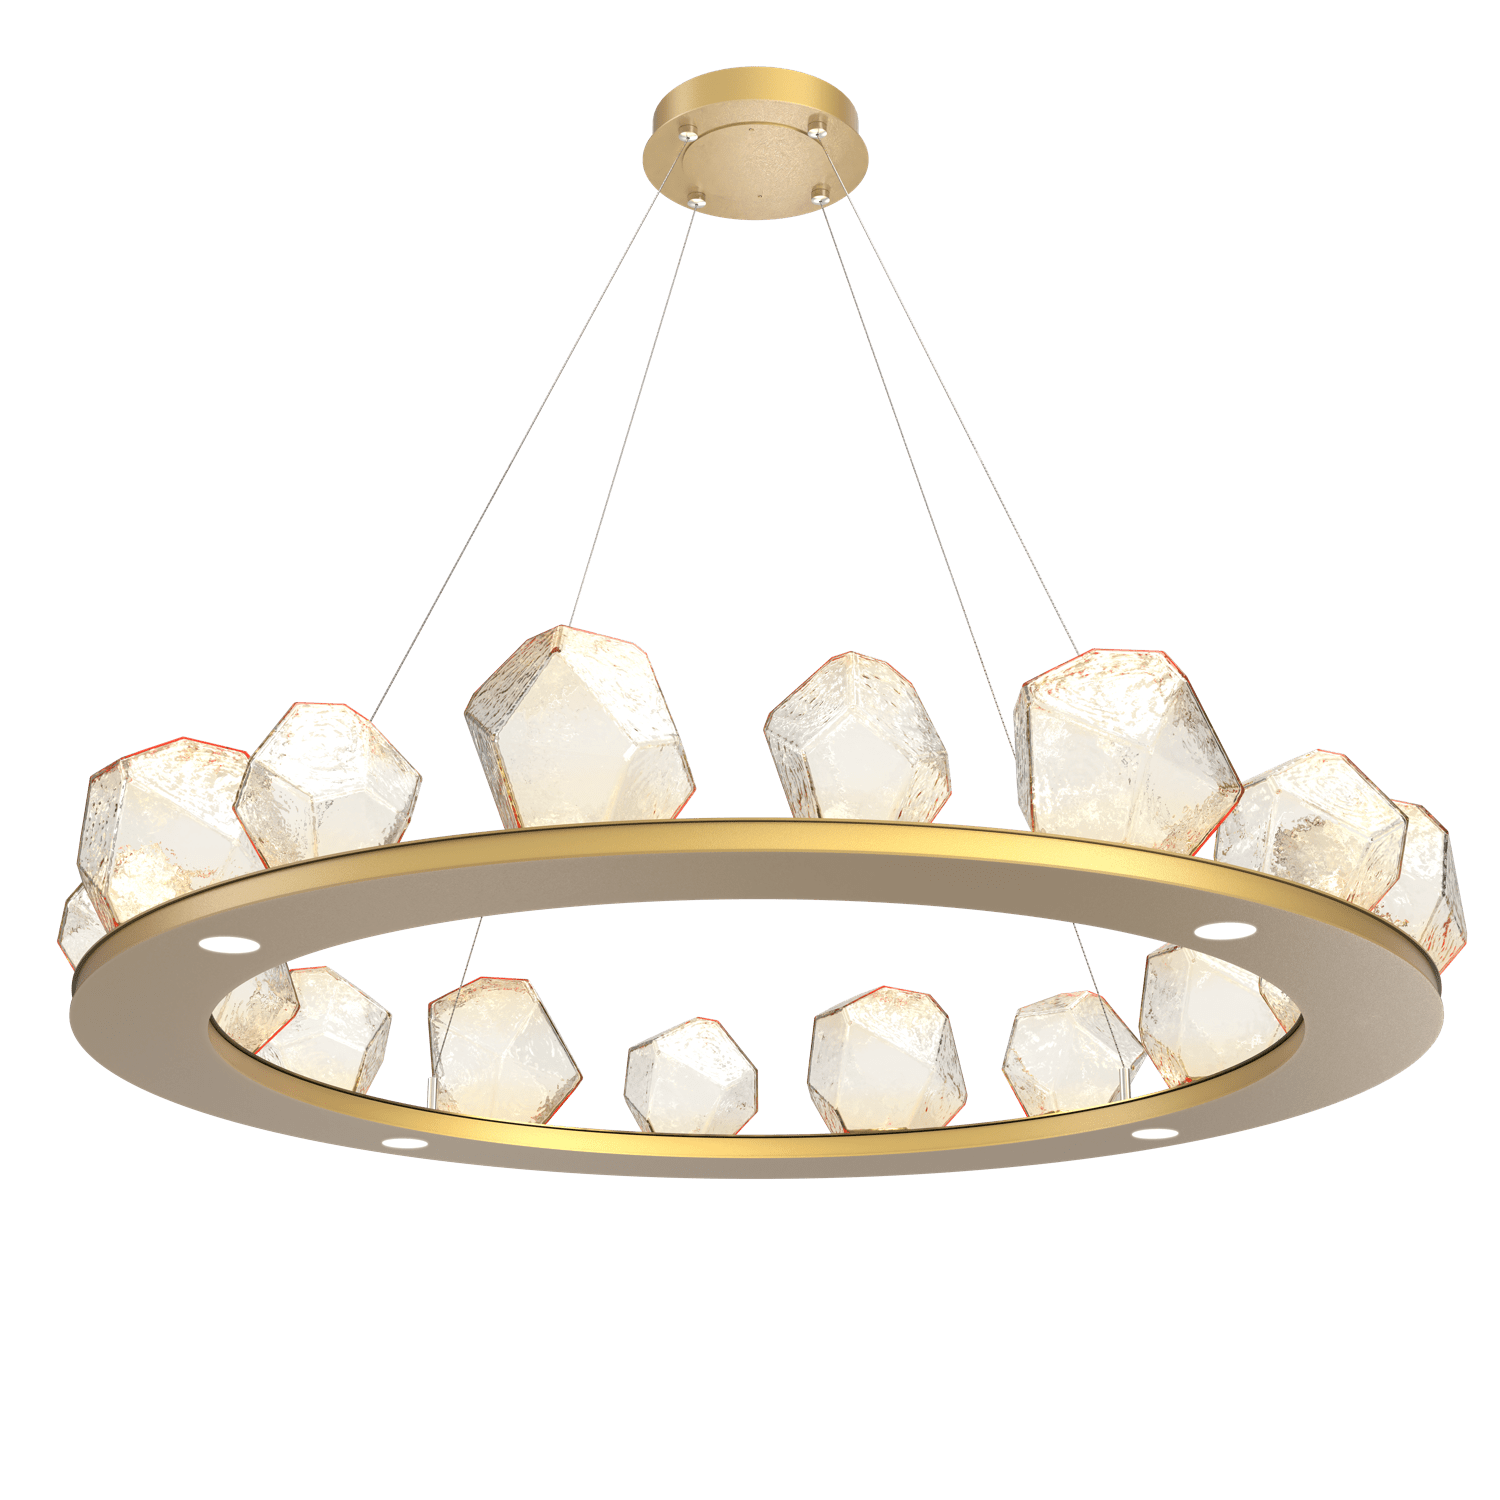 CHB0039-0D-GB-A-Hammerton-Studio-Gem-48-inch-ring-chandelier-with-gilded-brass-finish-and-amber-blown-glass-shades-and-LED-lamping